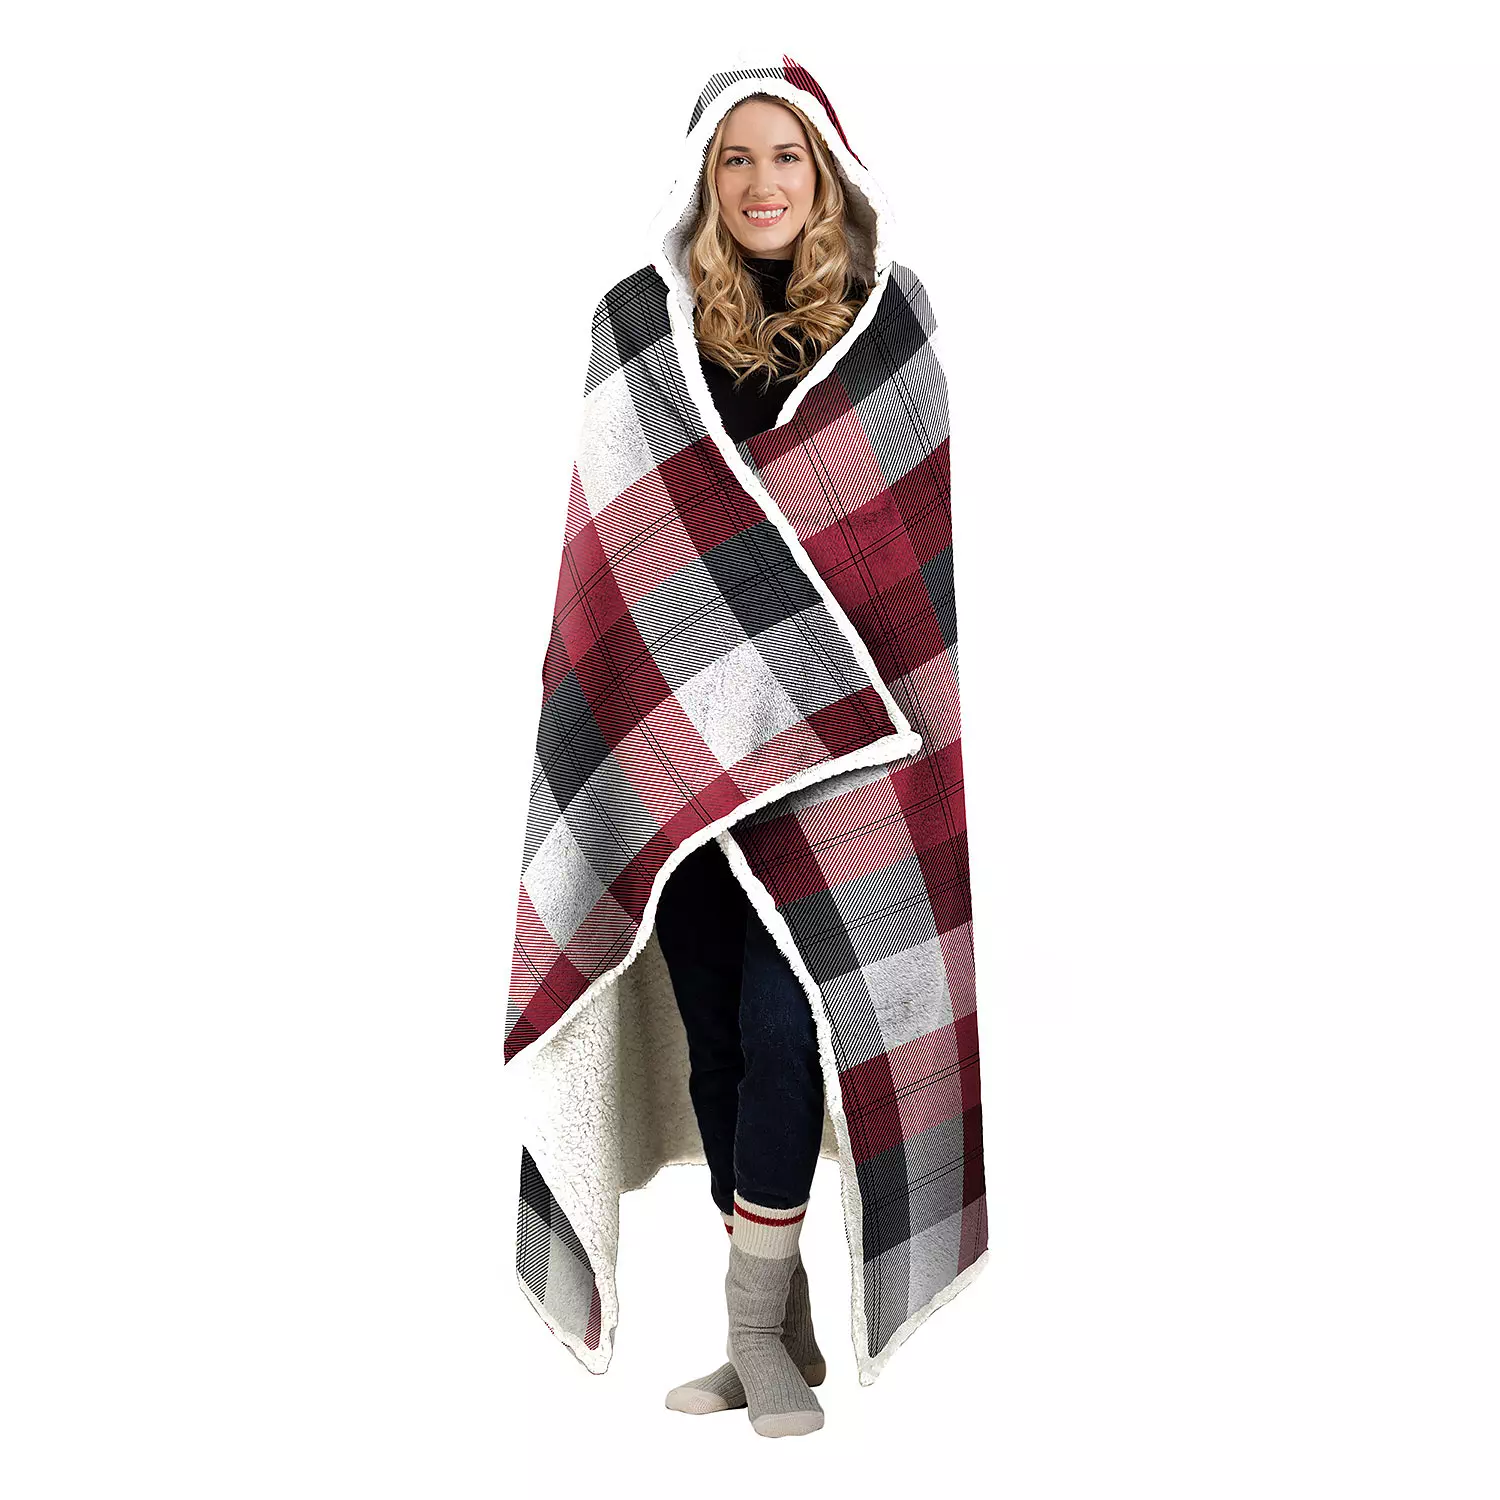 Three color buffalo plaid hooded throw blanket with sherpa lining, 48"x65"